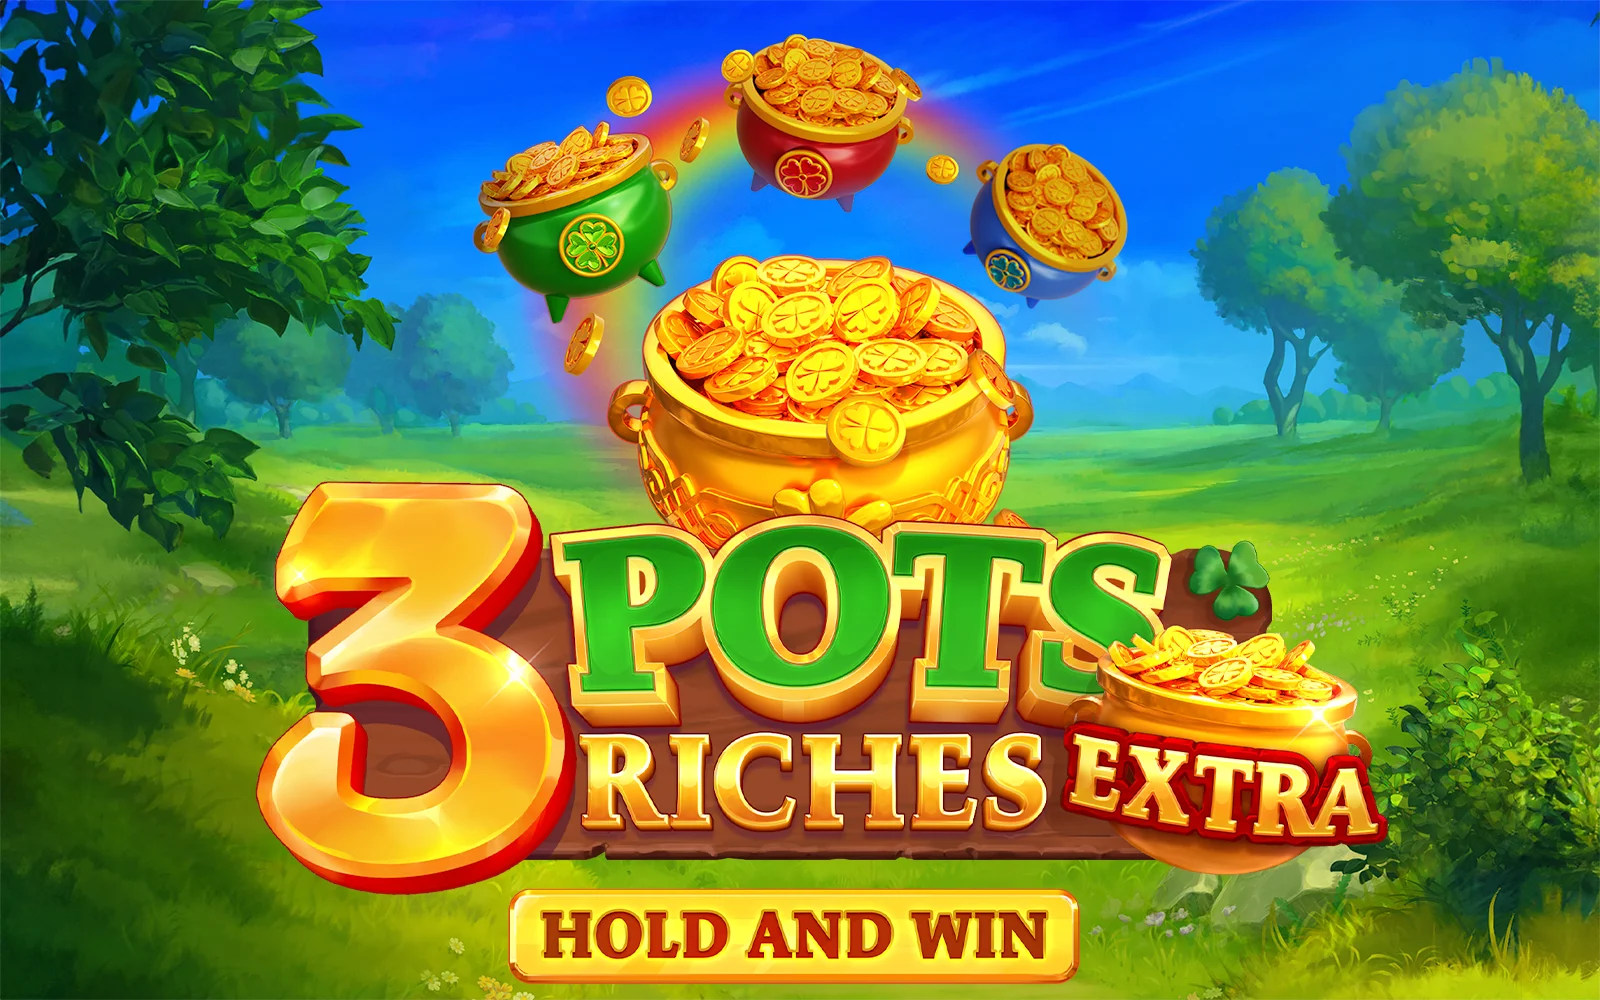 Gioca a 3 Pots Riches Extra: Hold and Win sul casino online Starcasino.be